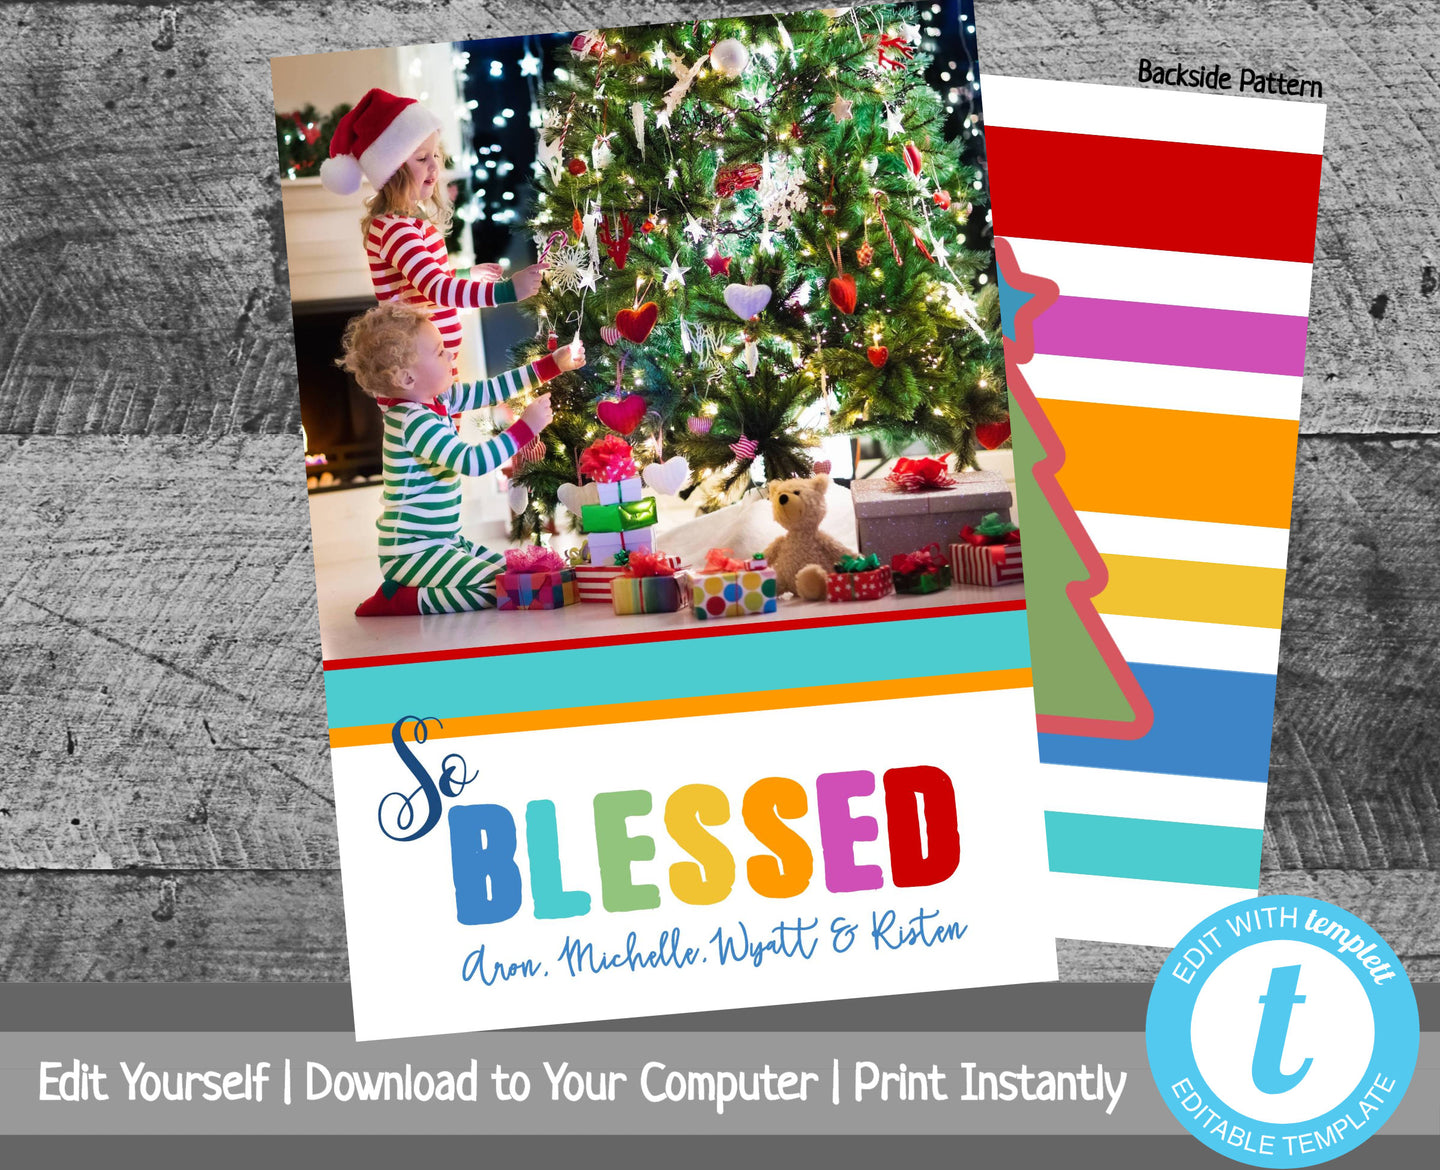 Christmas Card Template, Photo Christmas Cards, Holiday Card Template, So Blessed, Printable Christmas Cards with Photo, Colorful Stripes